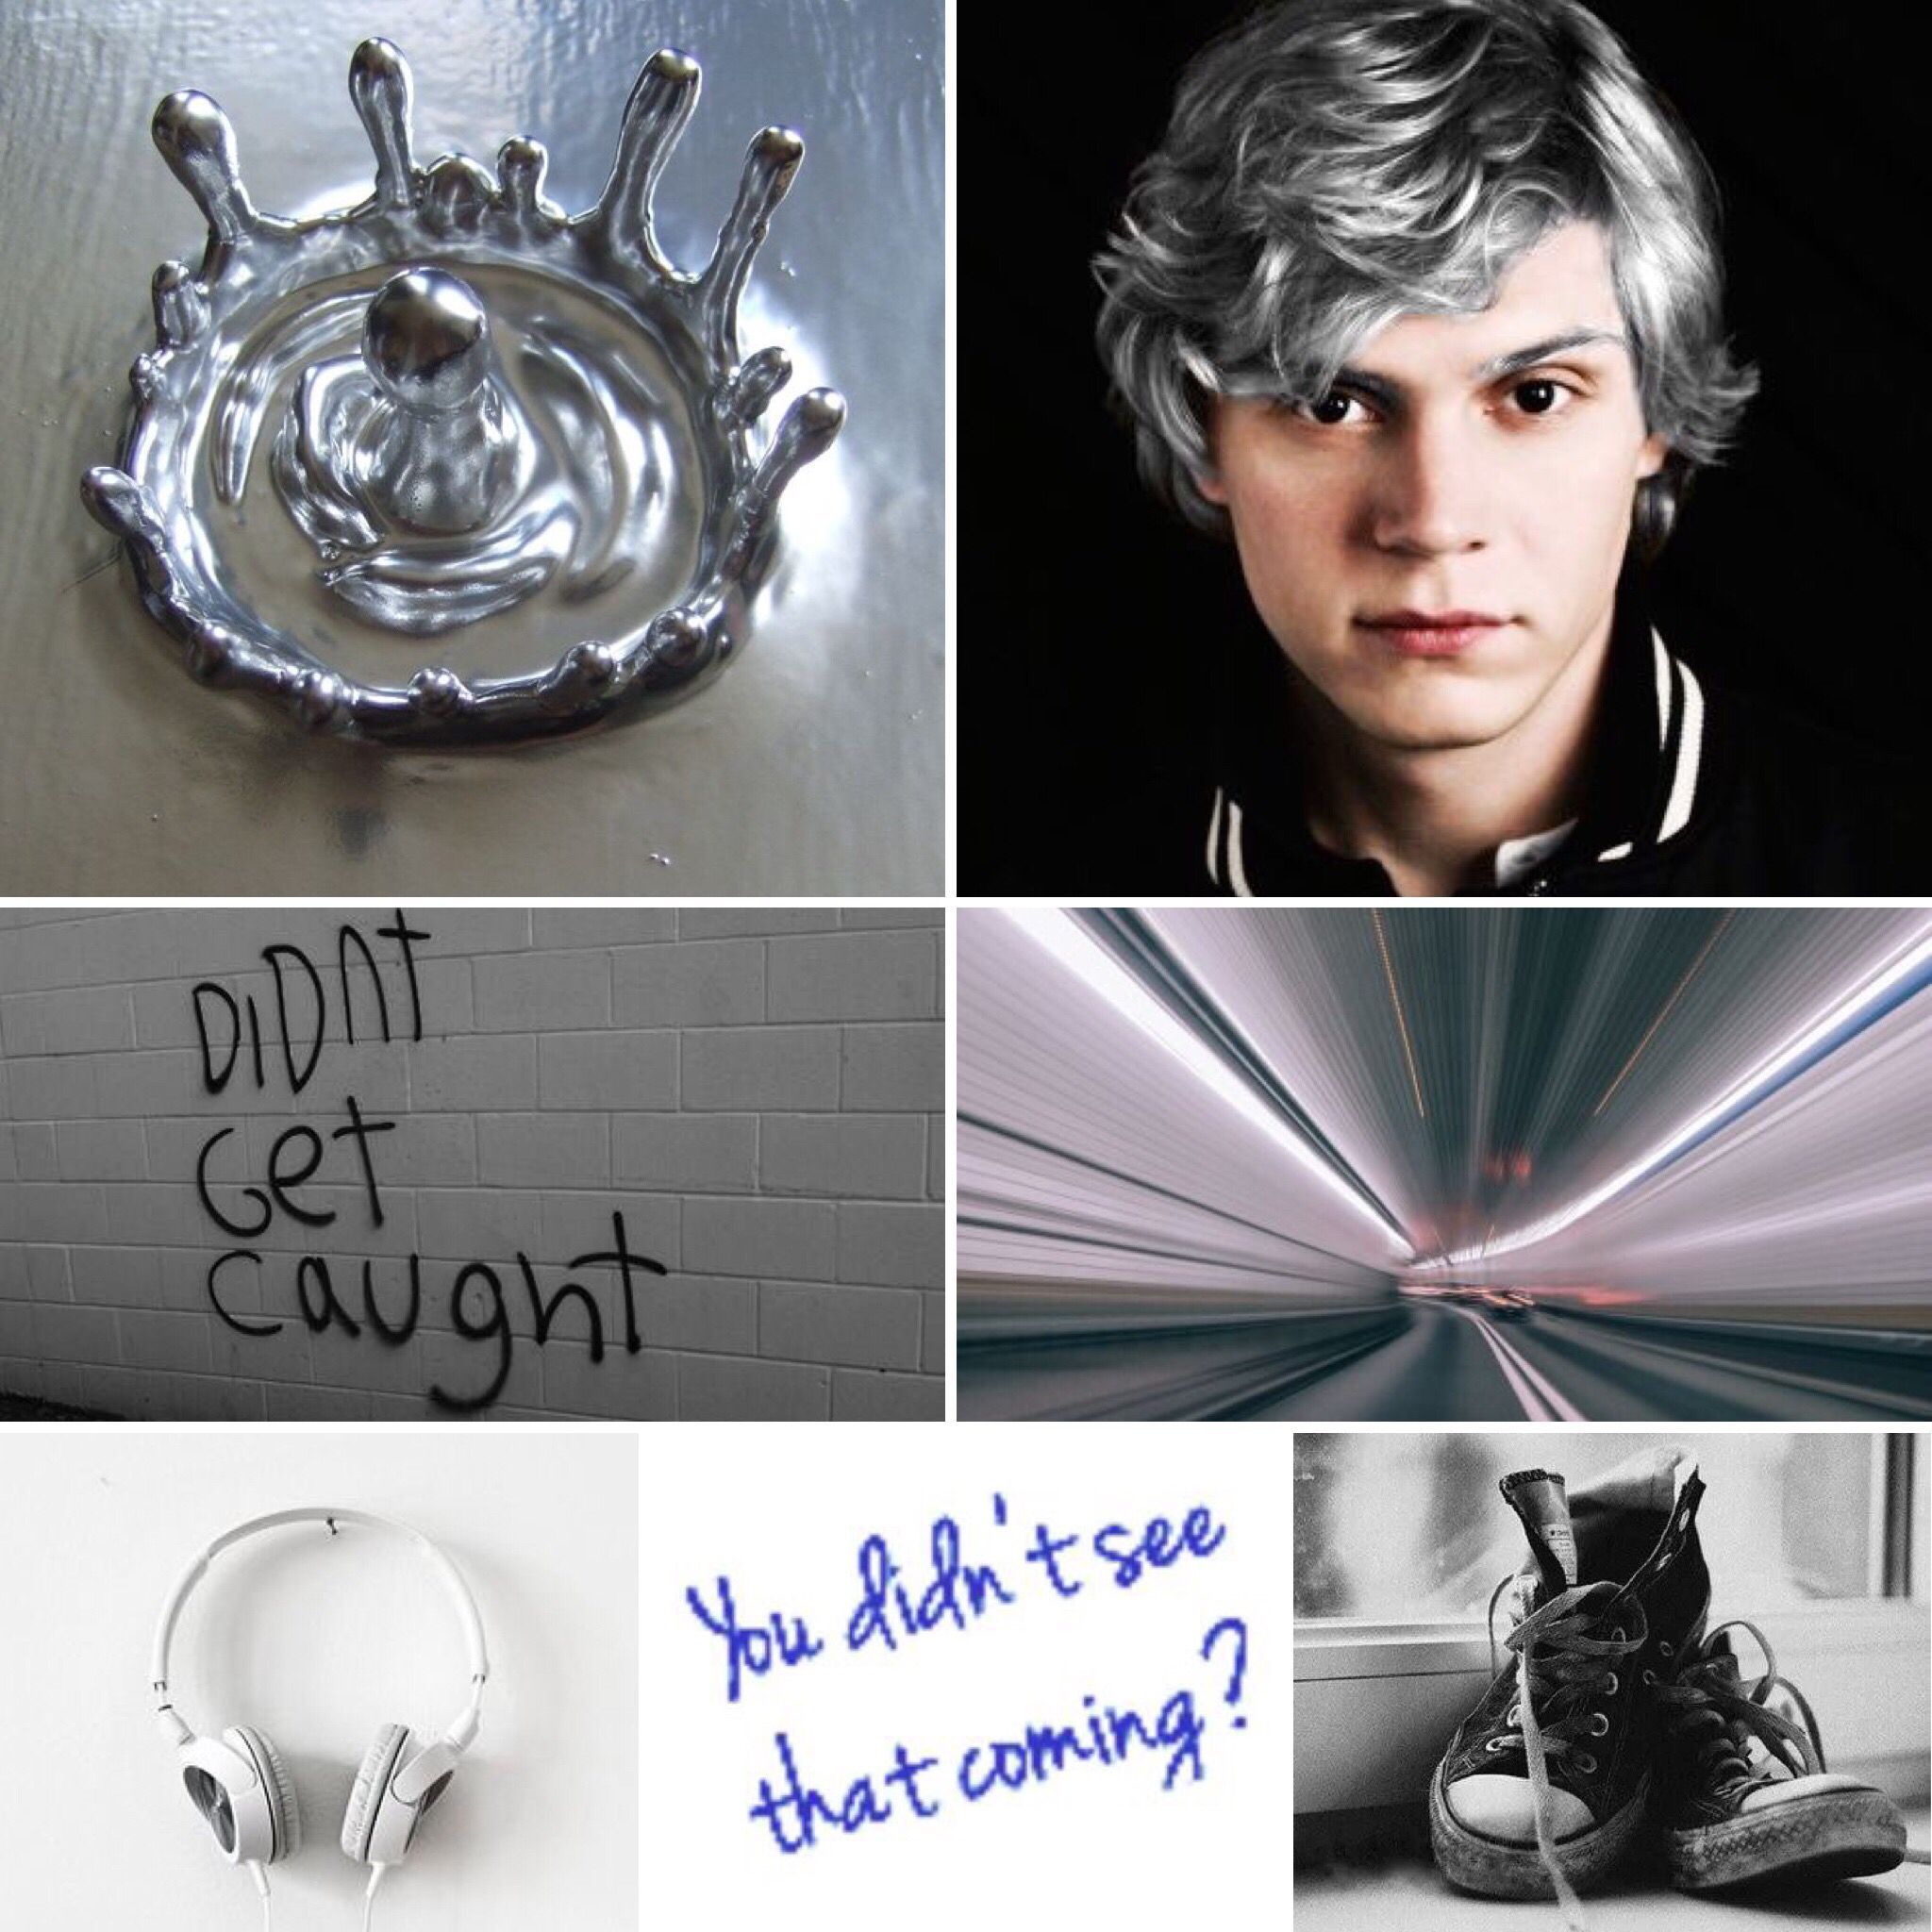 Quicksilver, Peter Maximoff aesthetic. I love this boy so much, I can't even explain it. He's precious and must be prote. Peter maximoff, Xmen comics, Quicksilver